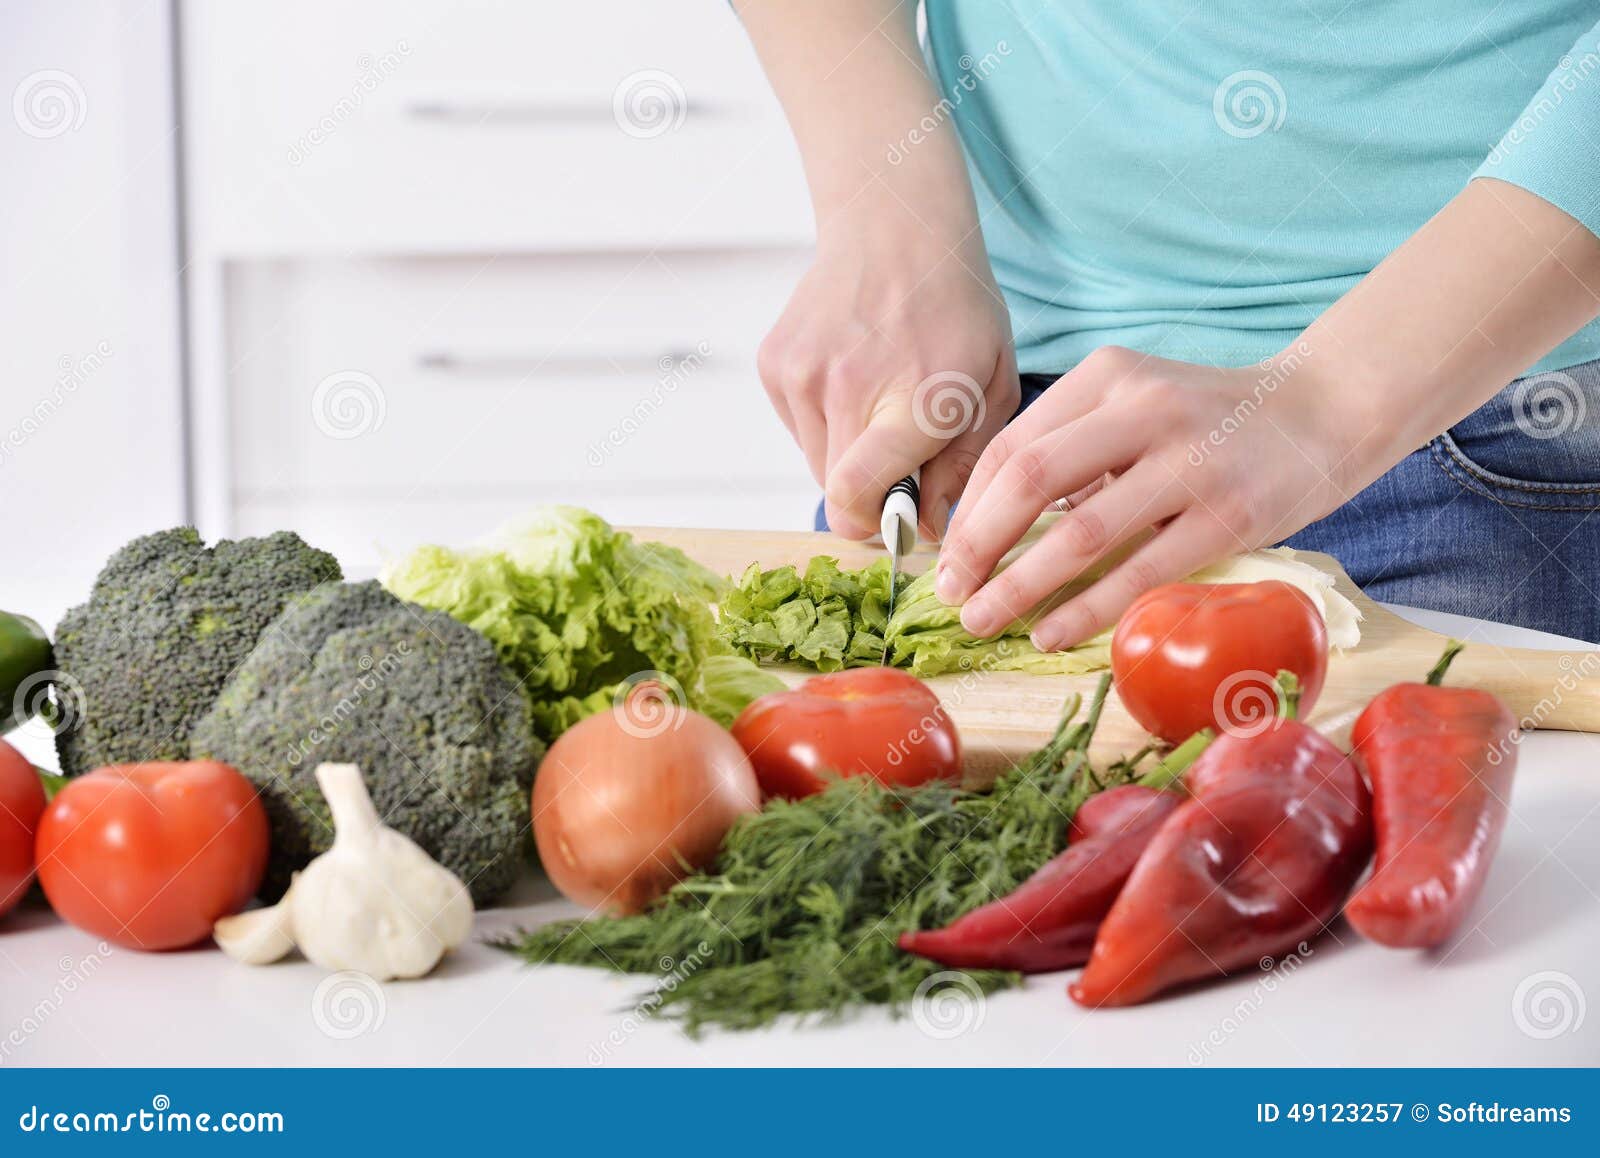 woman cooking in new kitchen making healthy food with vegetables.